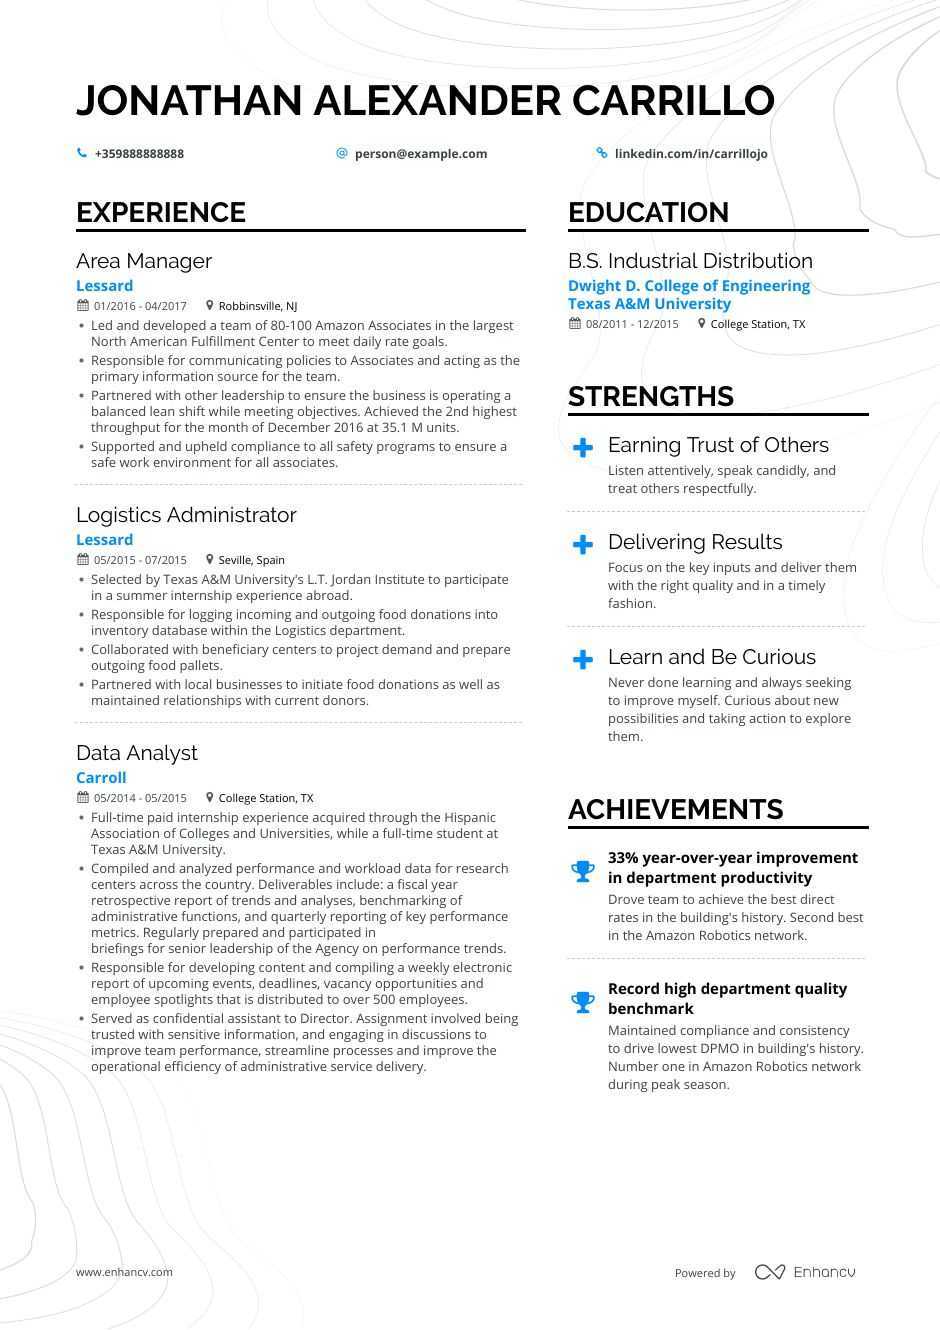 Download: Operations Manager Resume Example For 2020 | Enhancv With Operations Manager Report Template